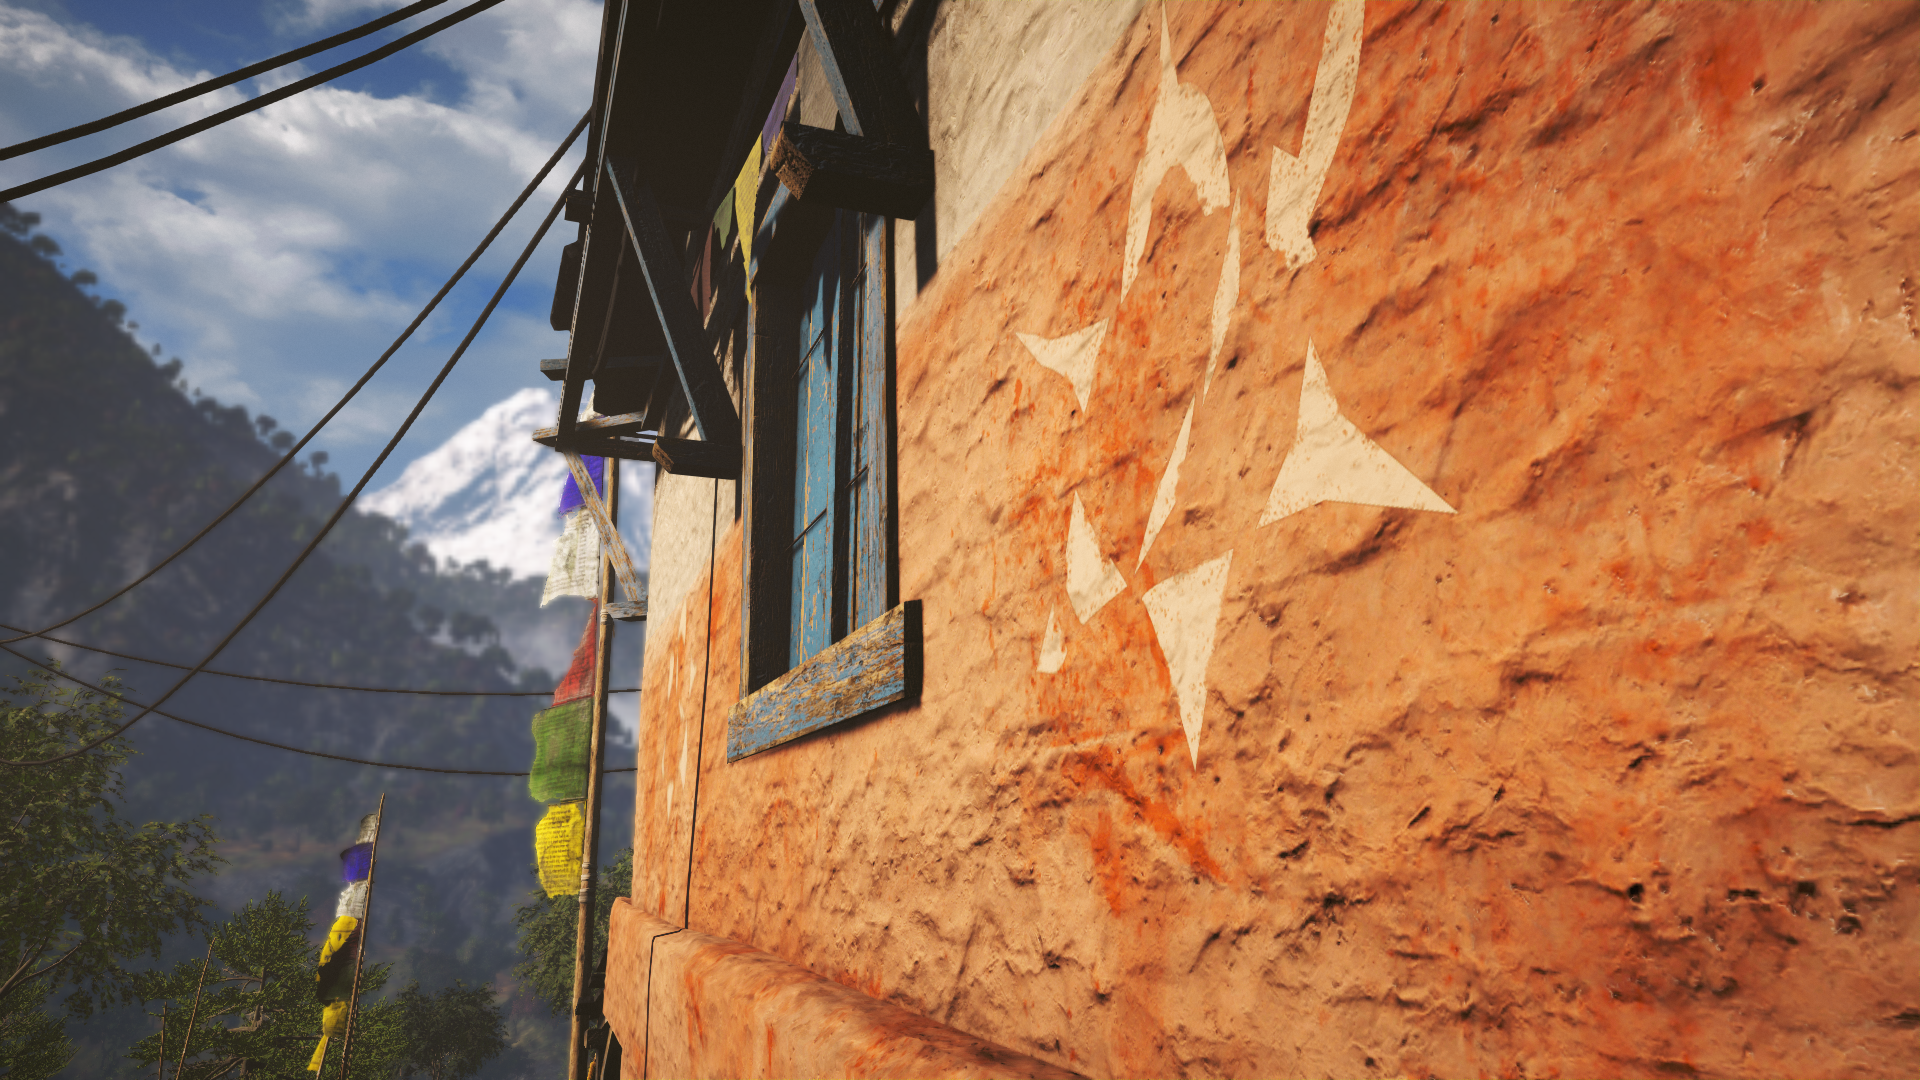 farcry42014-11-1710-1uisg8.png